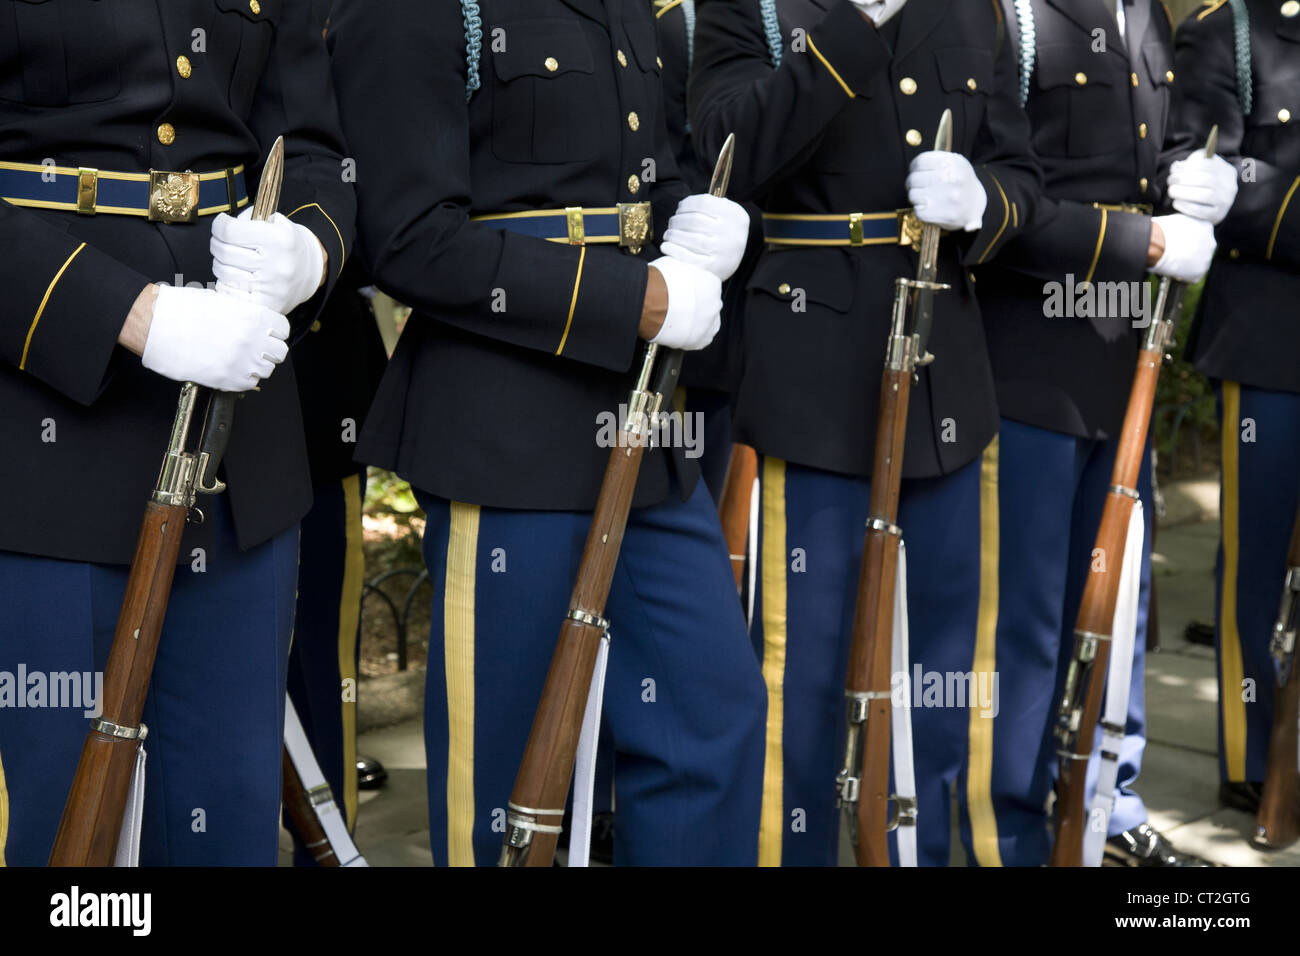 US Army 237th anniversary celebration in Bryant Park in New York City. Army Honor Guard. Stock Photo